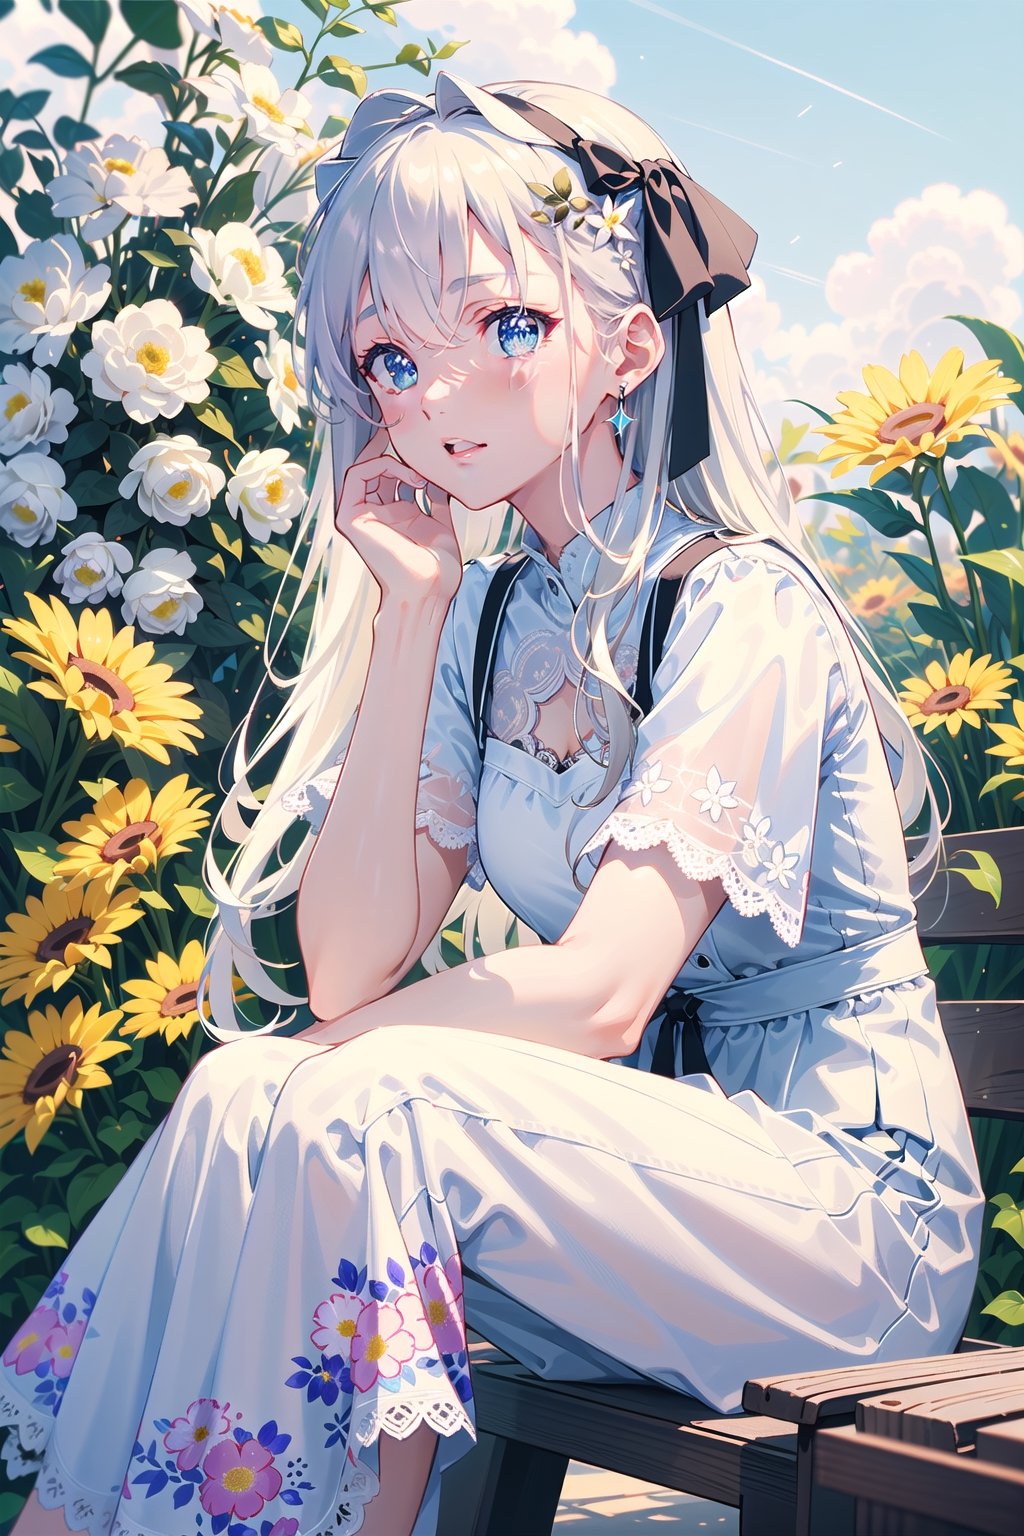 masterpiece, best quality, 1 girl, flowers, floral background, nature, pose, perfect hands, modern outfit, detailed, sparkling, sitting, lace detail, long hair, ultra detailed, ultra detailed face, clear eyes, good lighting,, perfect anatomy, stylish white outfit, different hairstyles, hair ribbons, front view, (perfect hands), close up